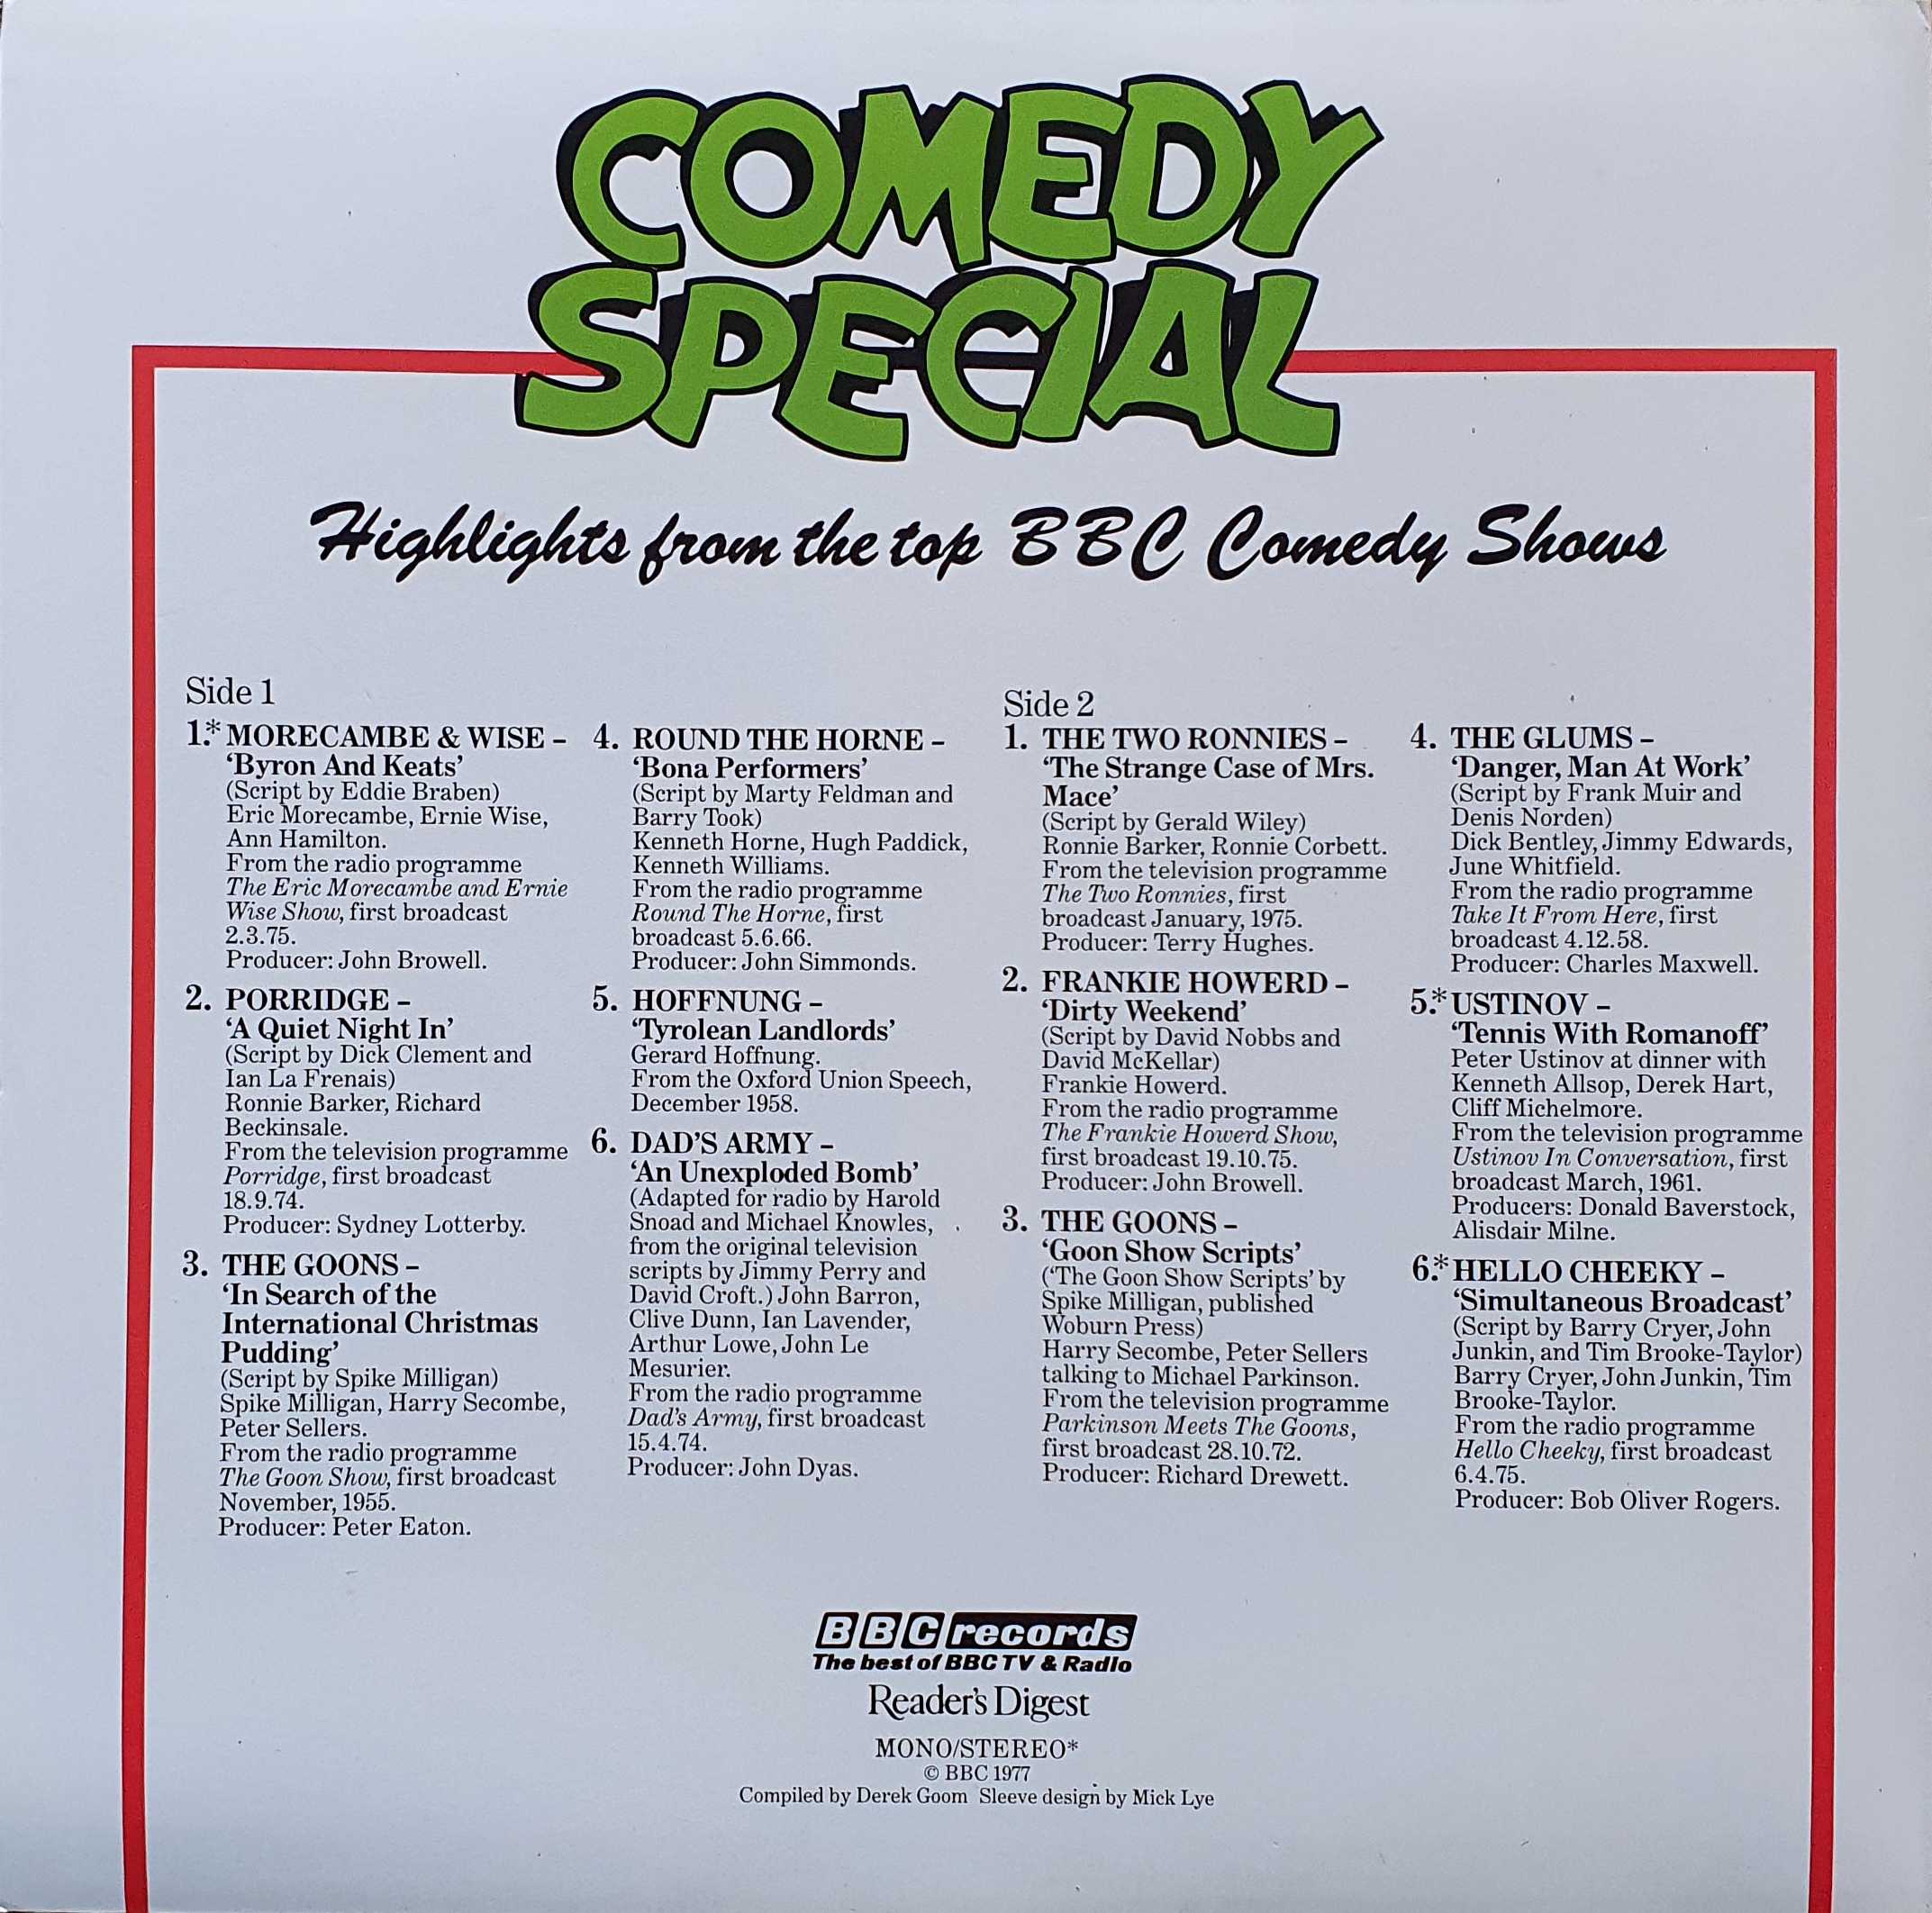 Picture of RD4-358-6 Comedy special - Highlights from the top BBC Comedy shows by artist Various from the BBC records and Tapes library